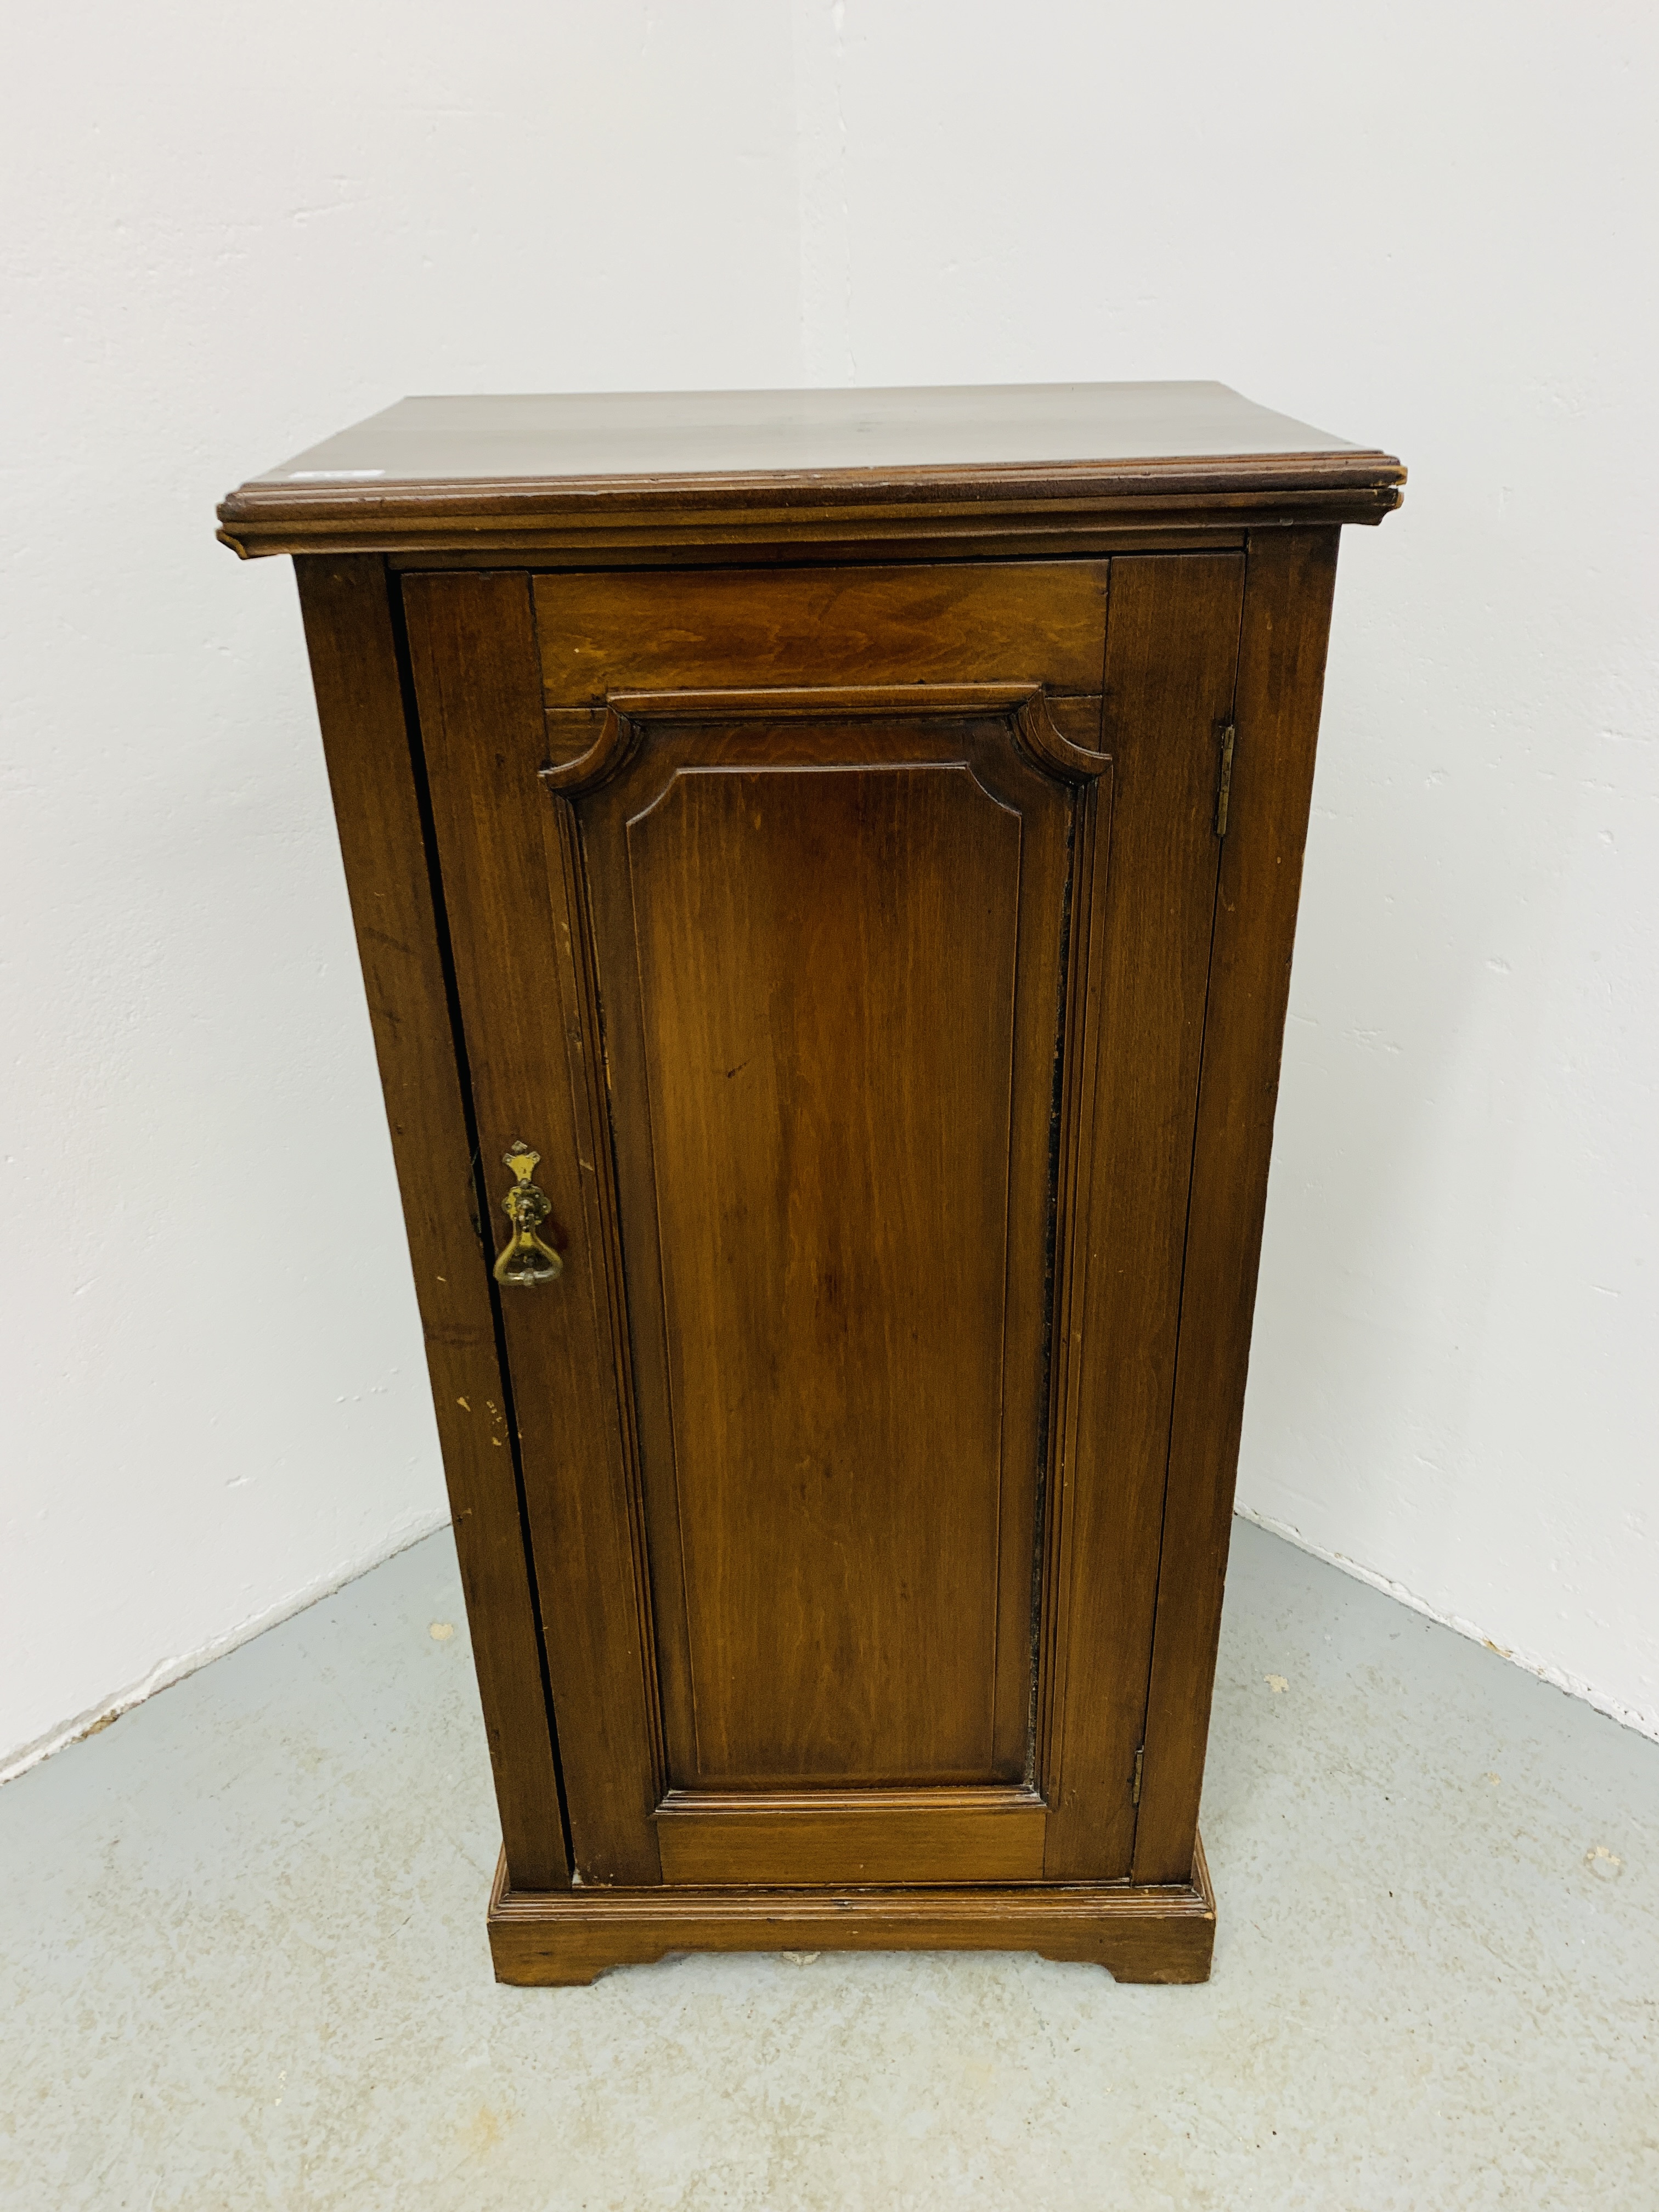 A HARDWOOD CABINET WITH PANEL DOOR AND SHELVED INTERIOR - W 50CM. D 35CM. H 100CM.